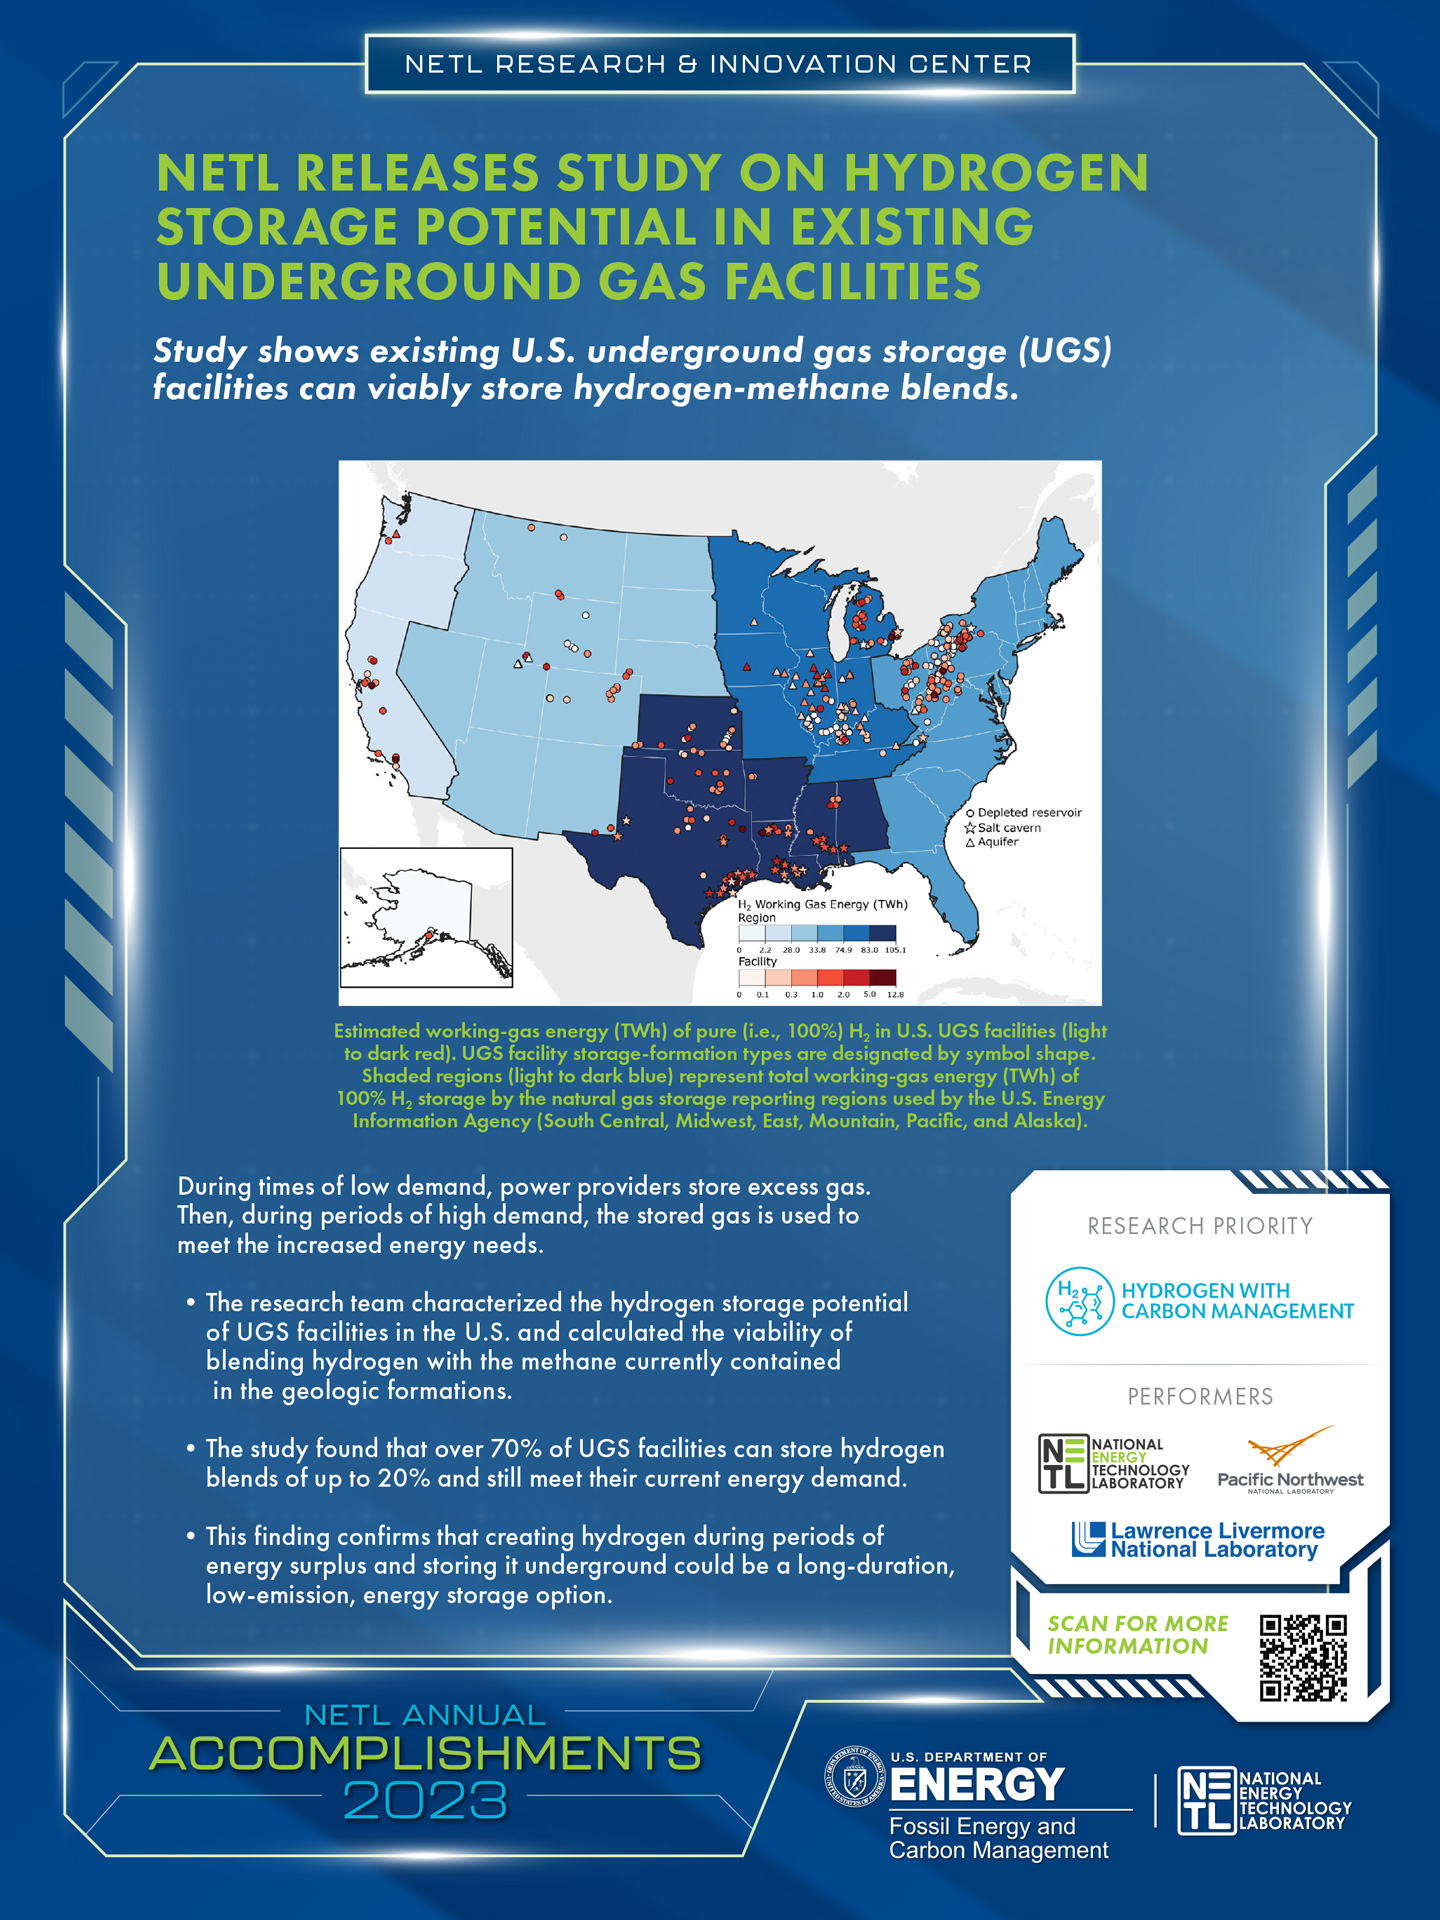 NETL Releases Study on Hydrogen Storage Potential in Existing Underground Gas Facilities